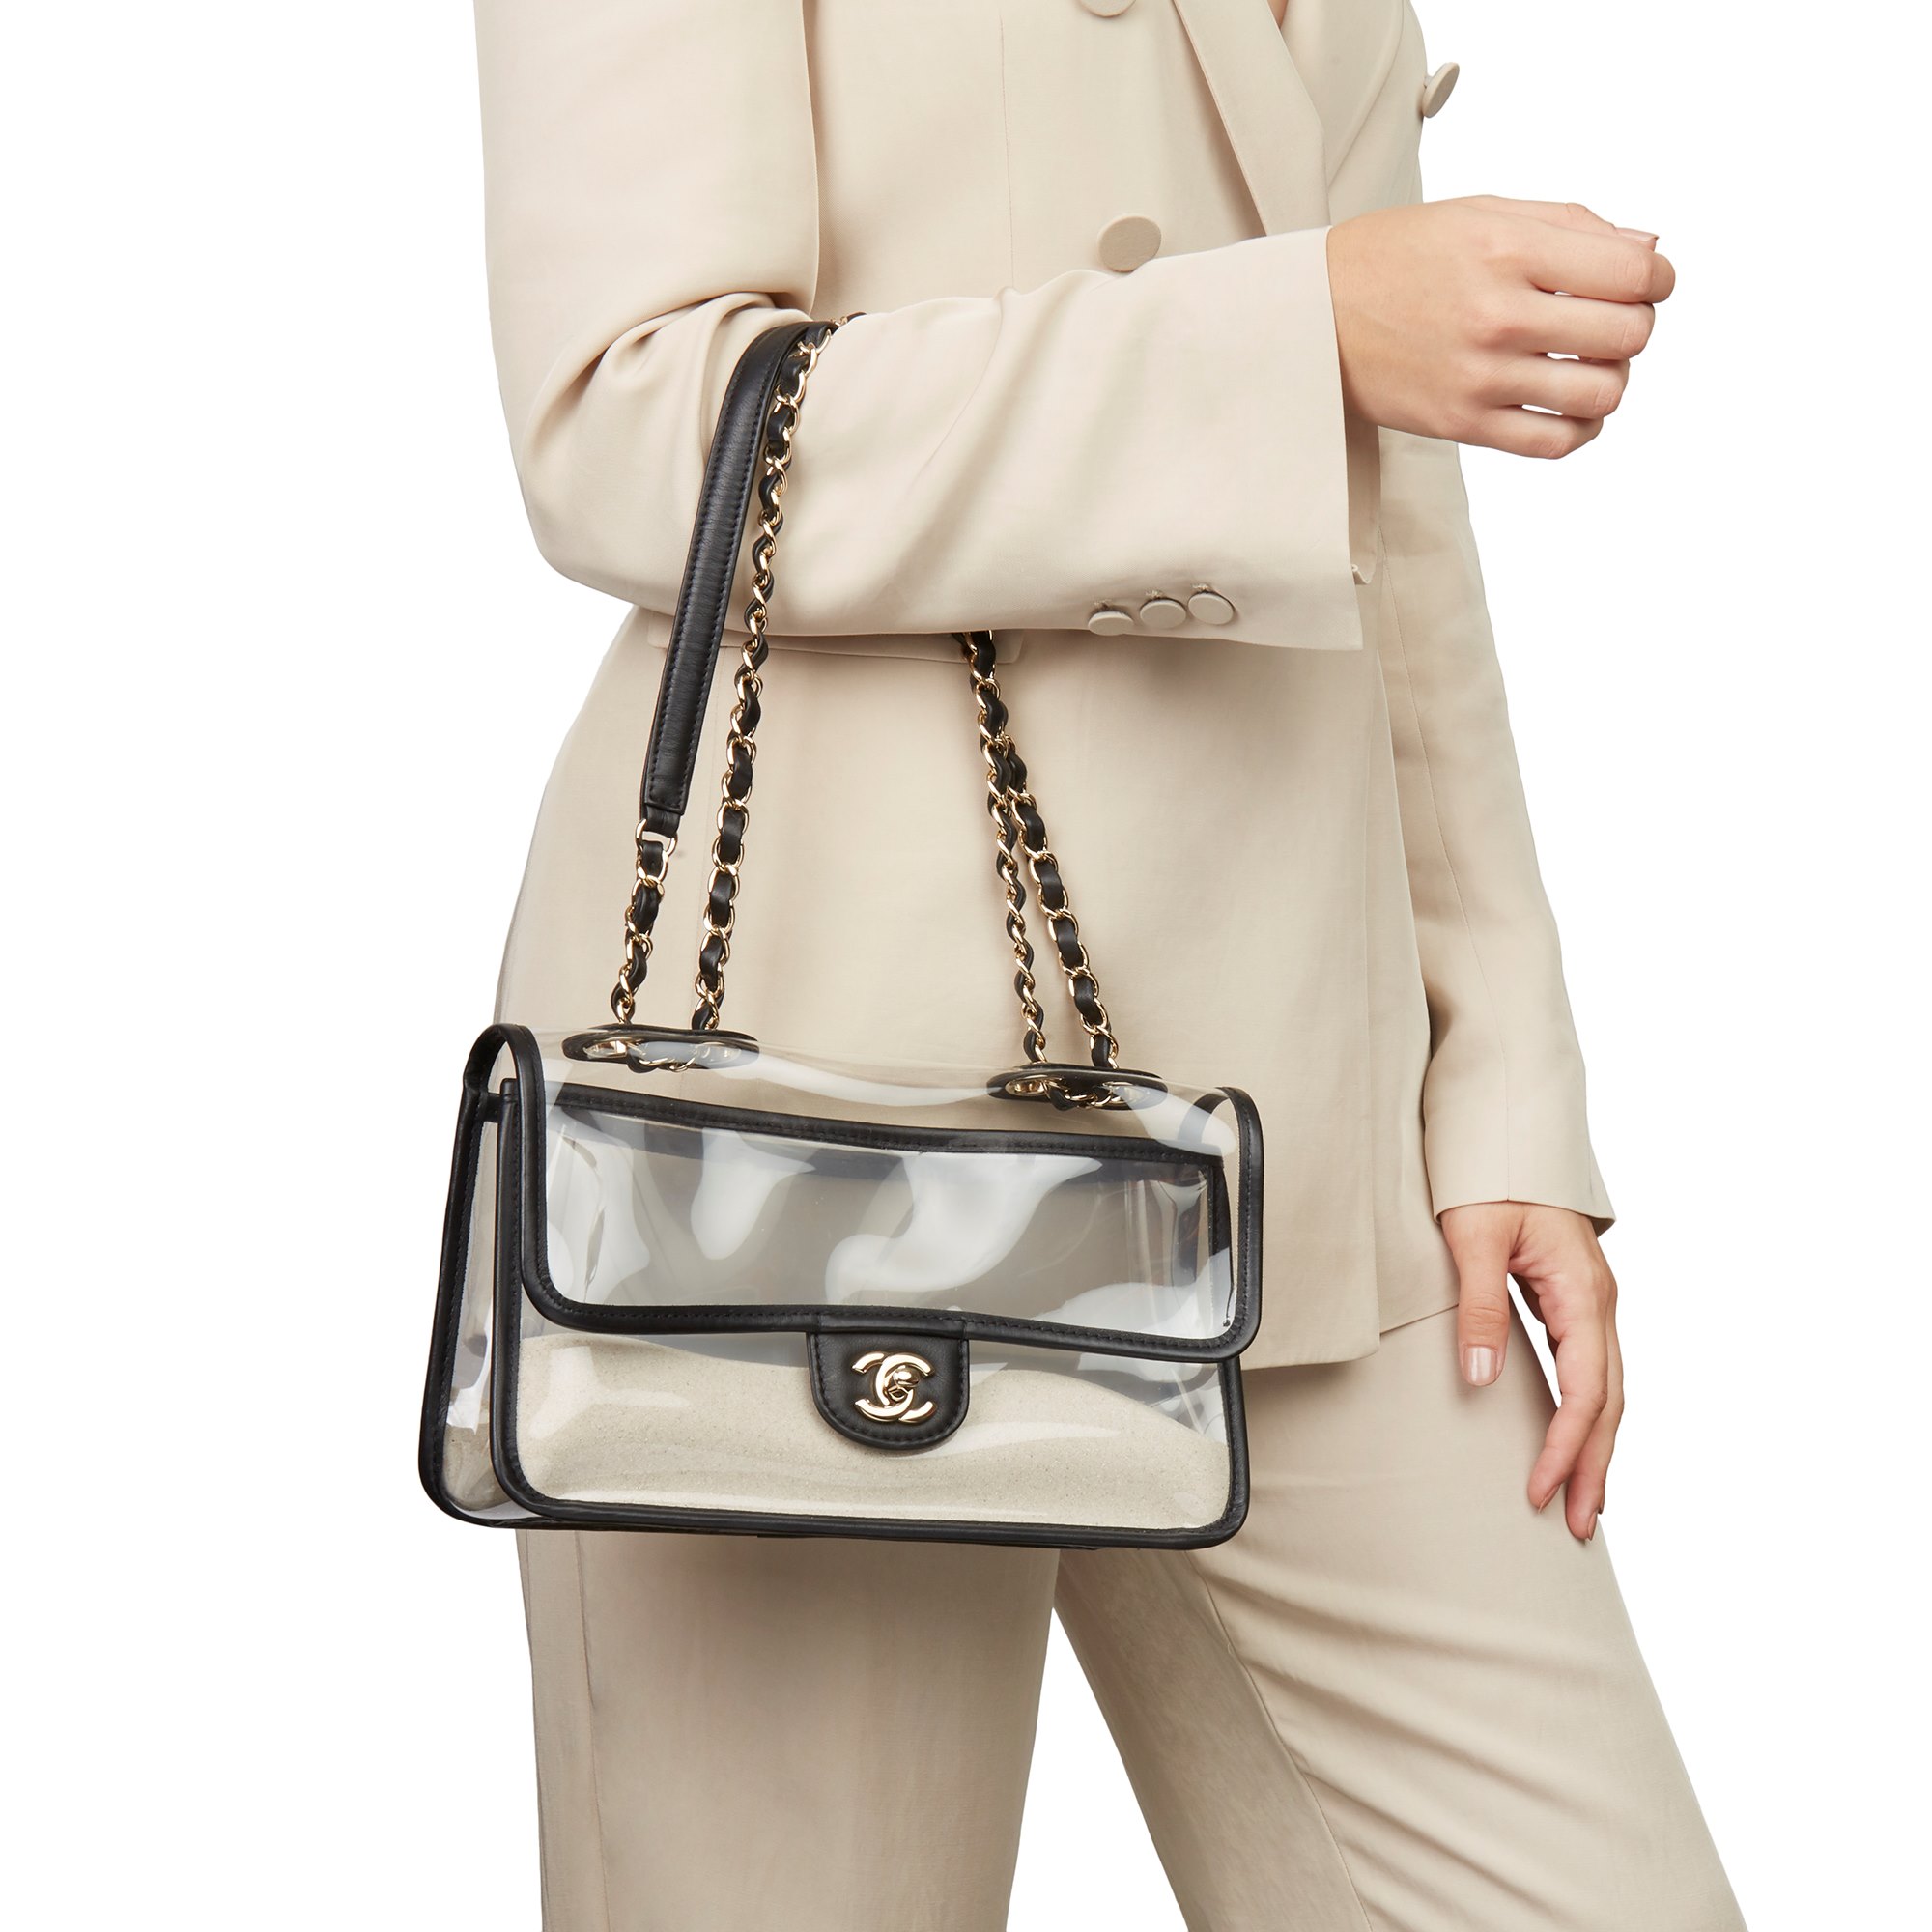 Chanel Sand by the Sea Flap Bag 2019 HB2994 | Second Hand Handbags